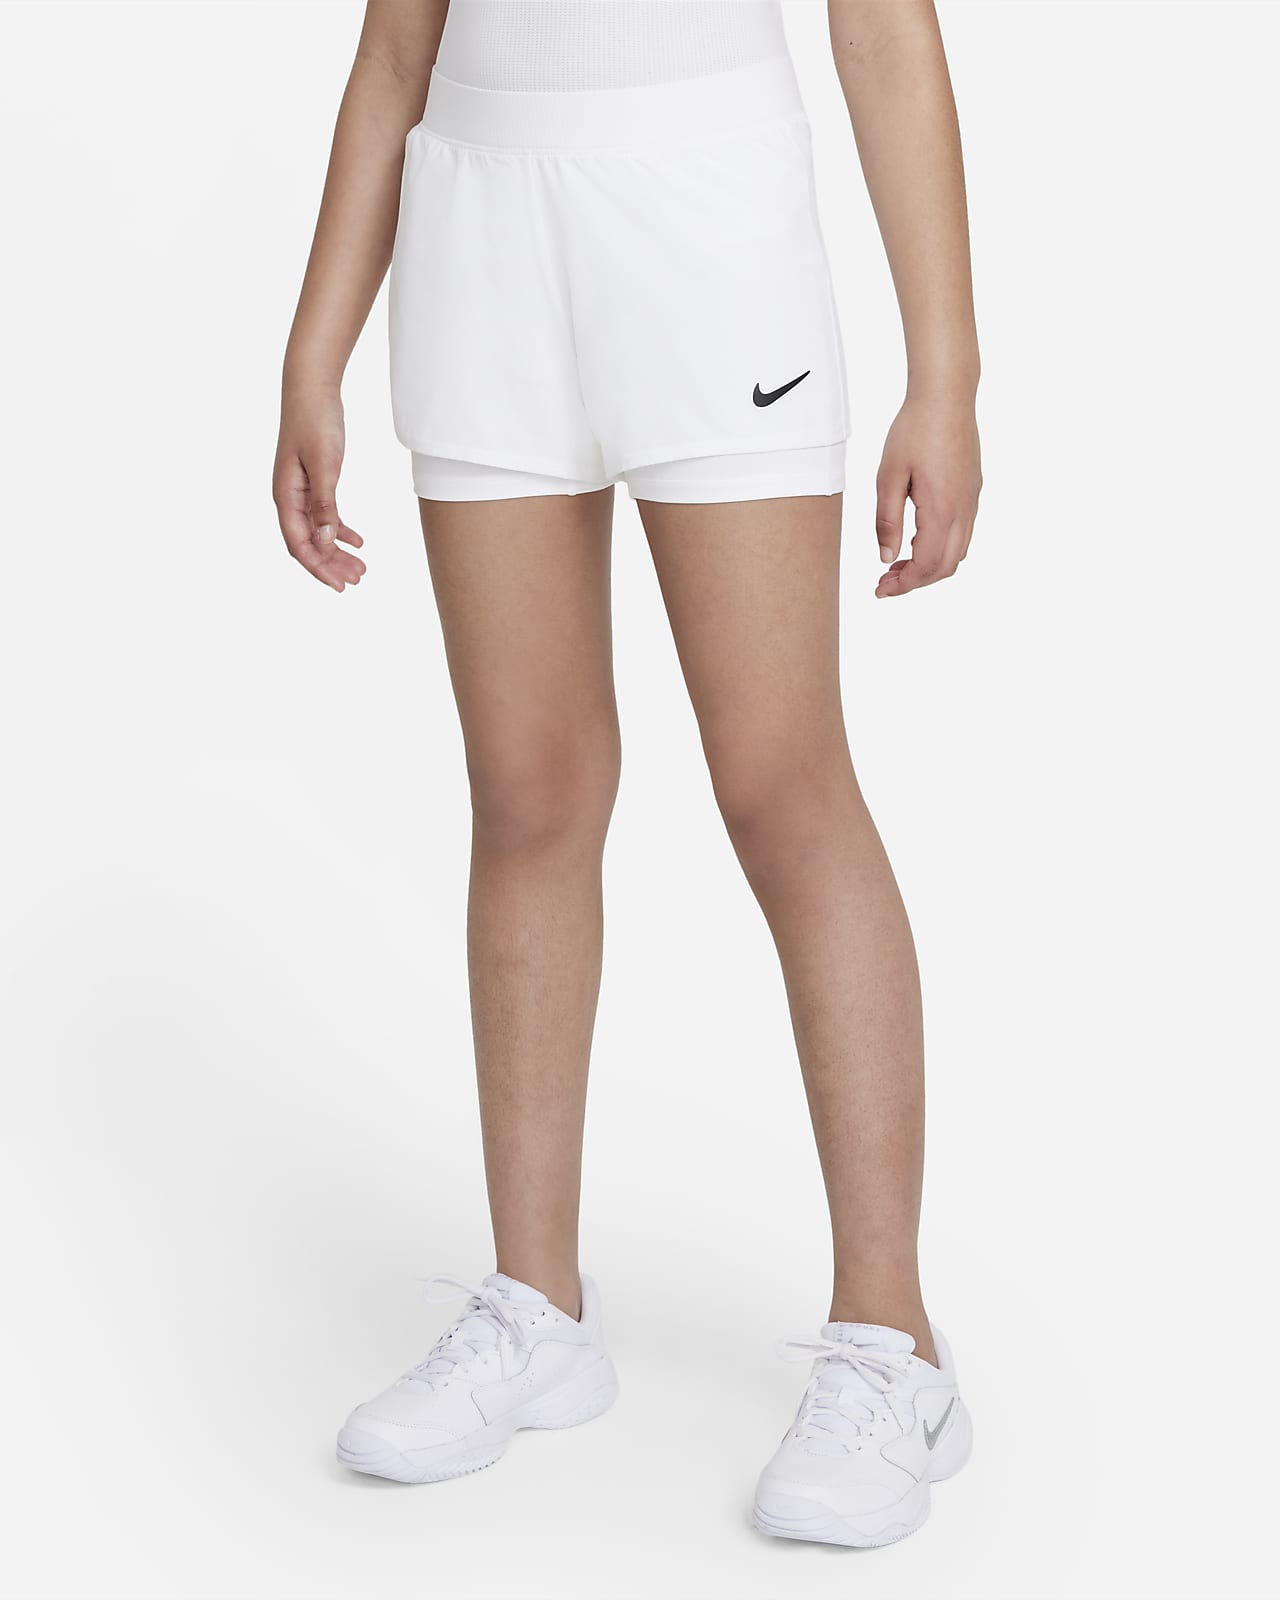  Nike Dry Girls Peach & Coral Dri-fit Running Track Athletic  Shorts Small: Clothing, Shoes & Jewelry